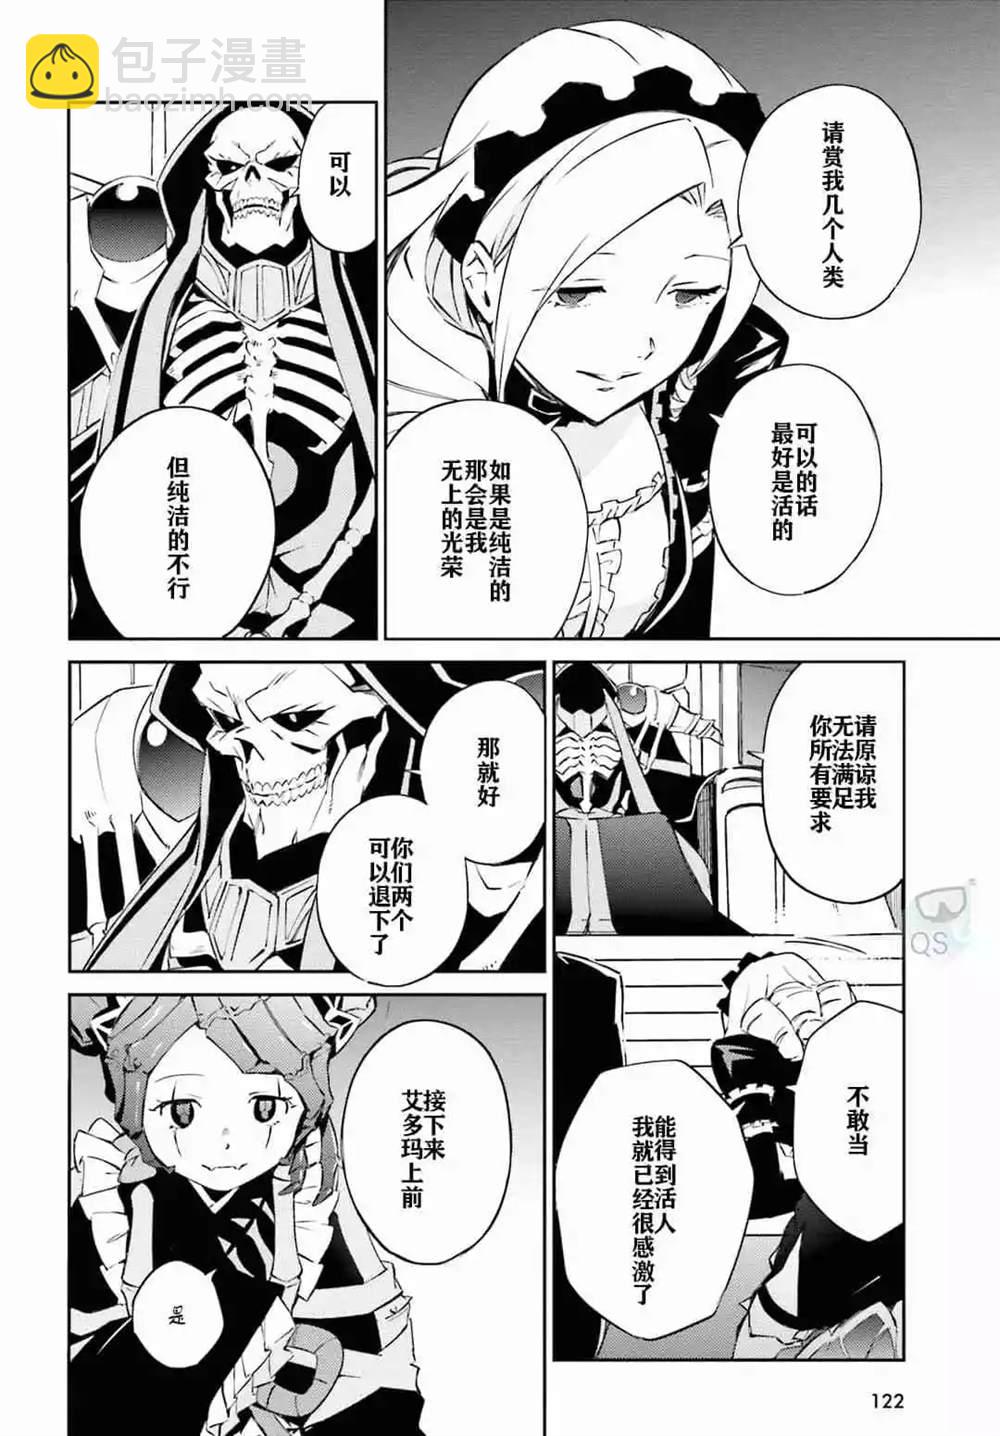 OVERLORD - 第53话 - 4